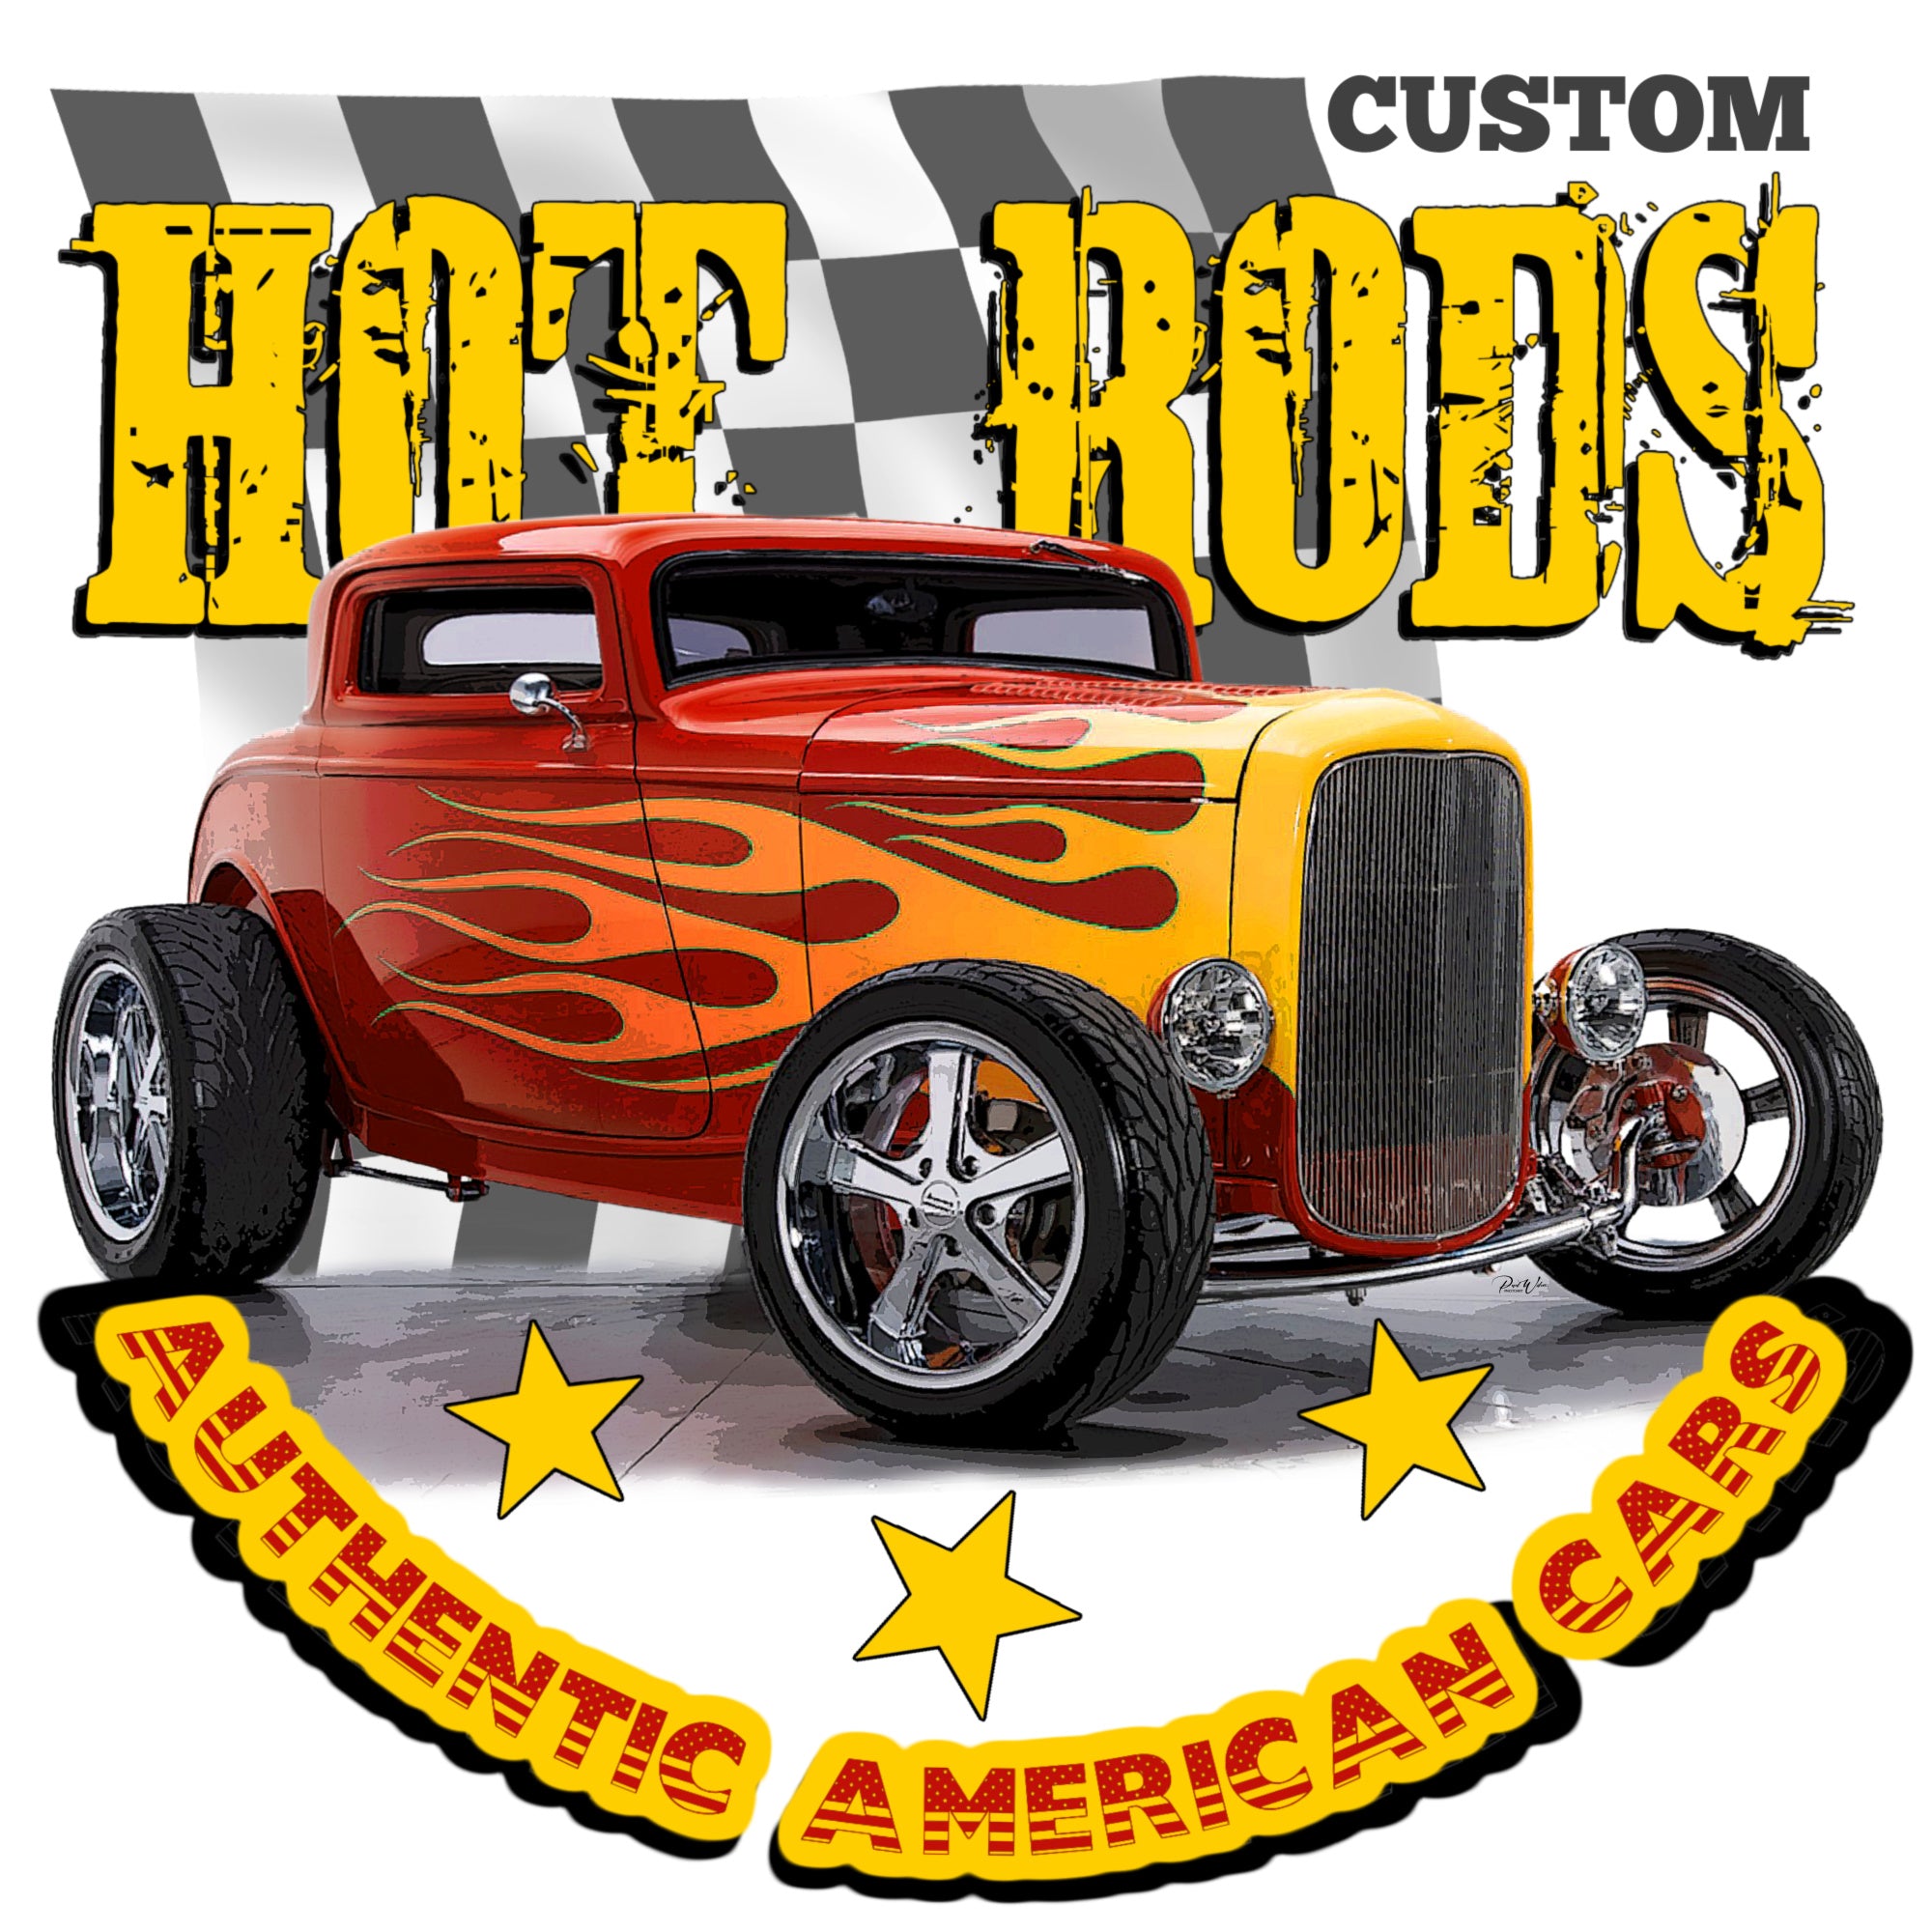 Custom Hot Rods - Authentic American Cars - Image